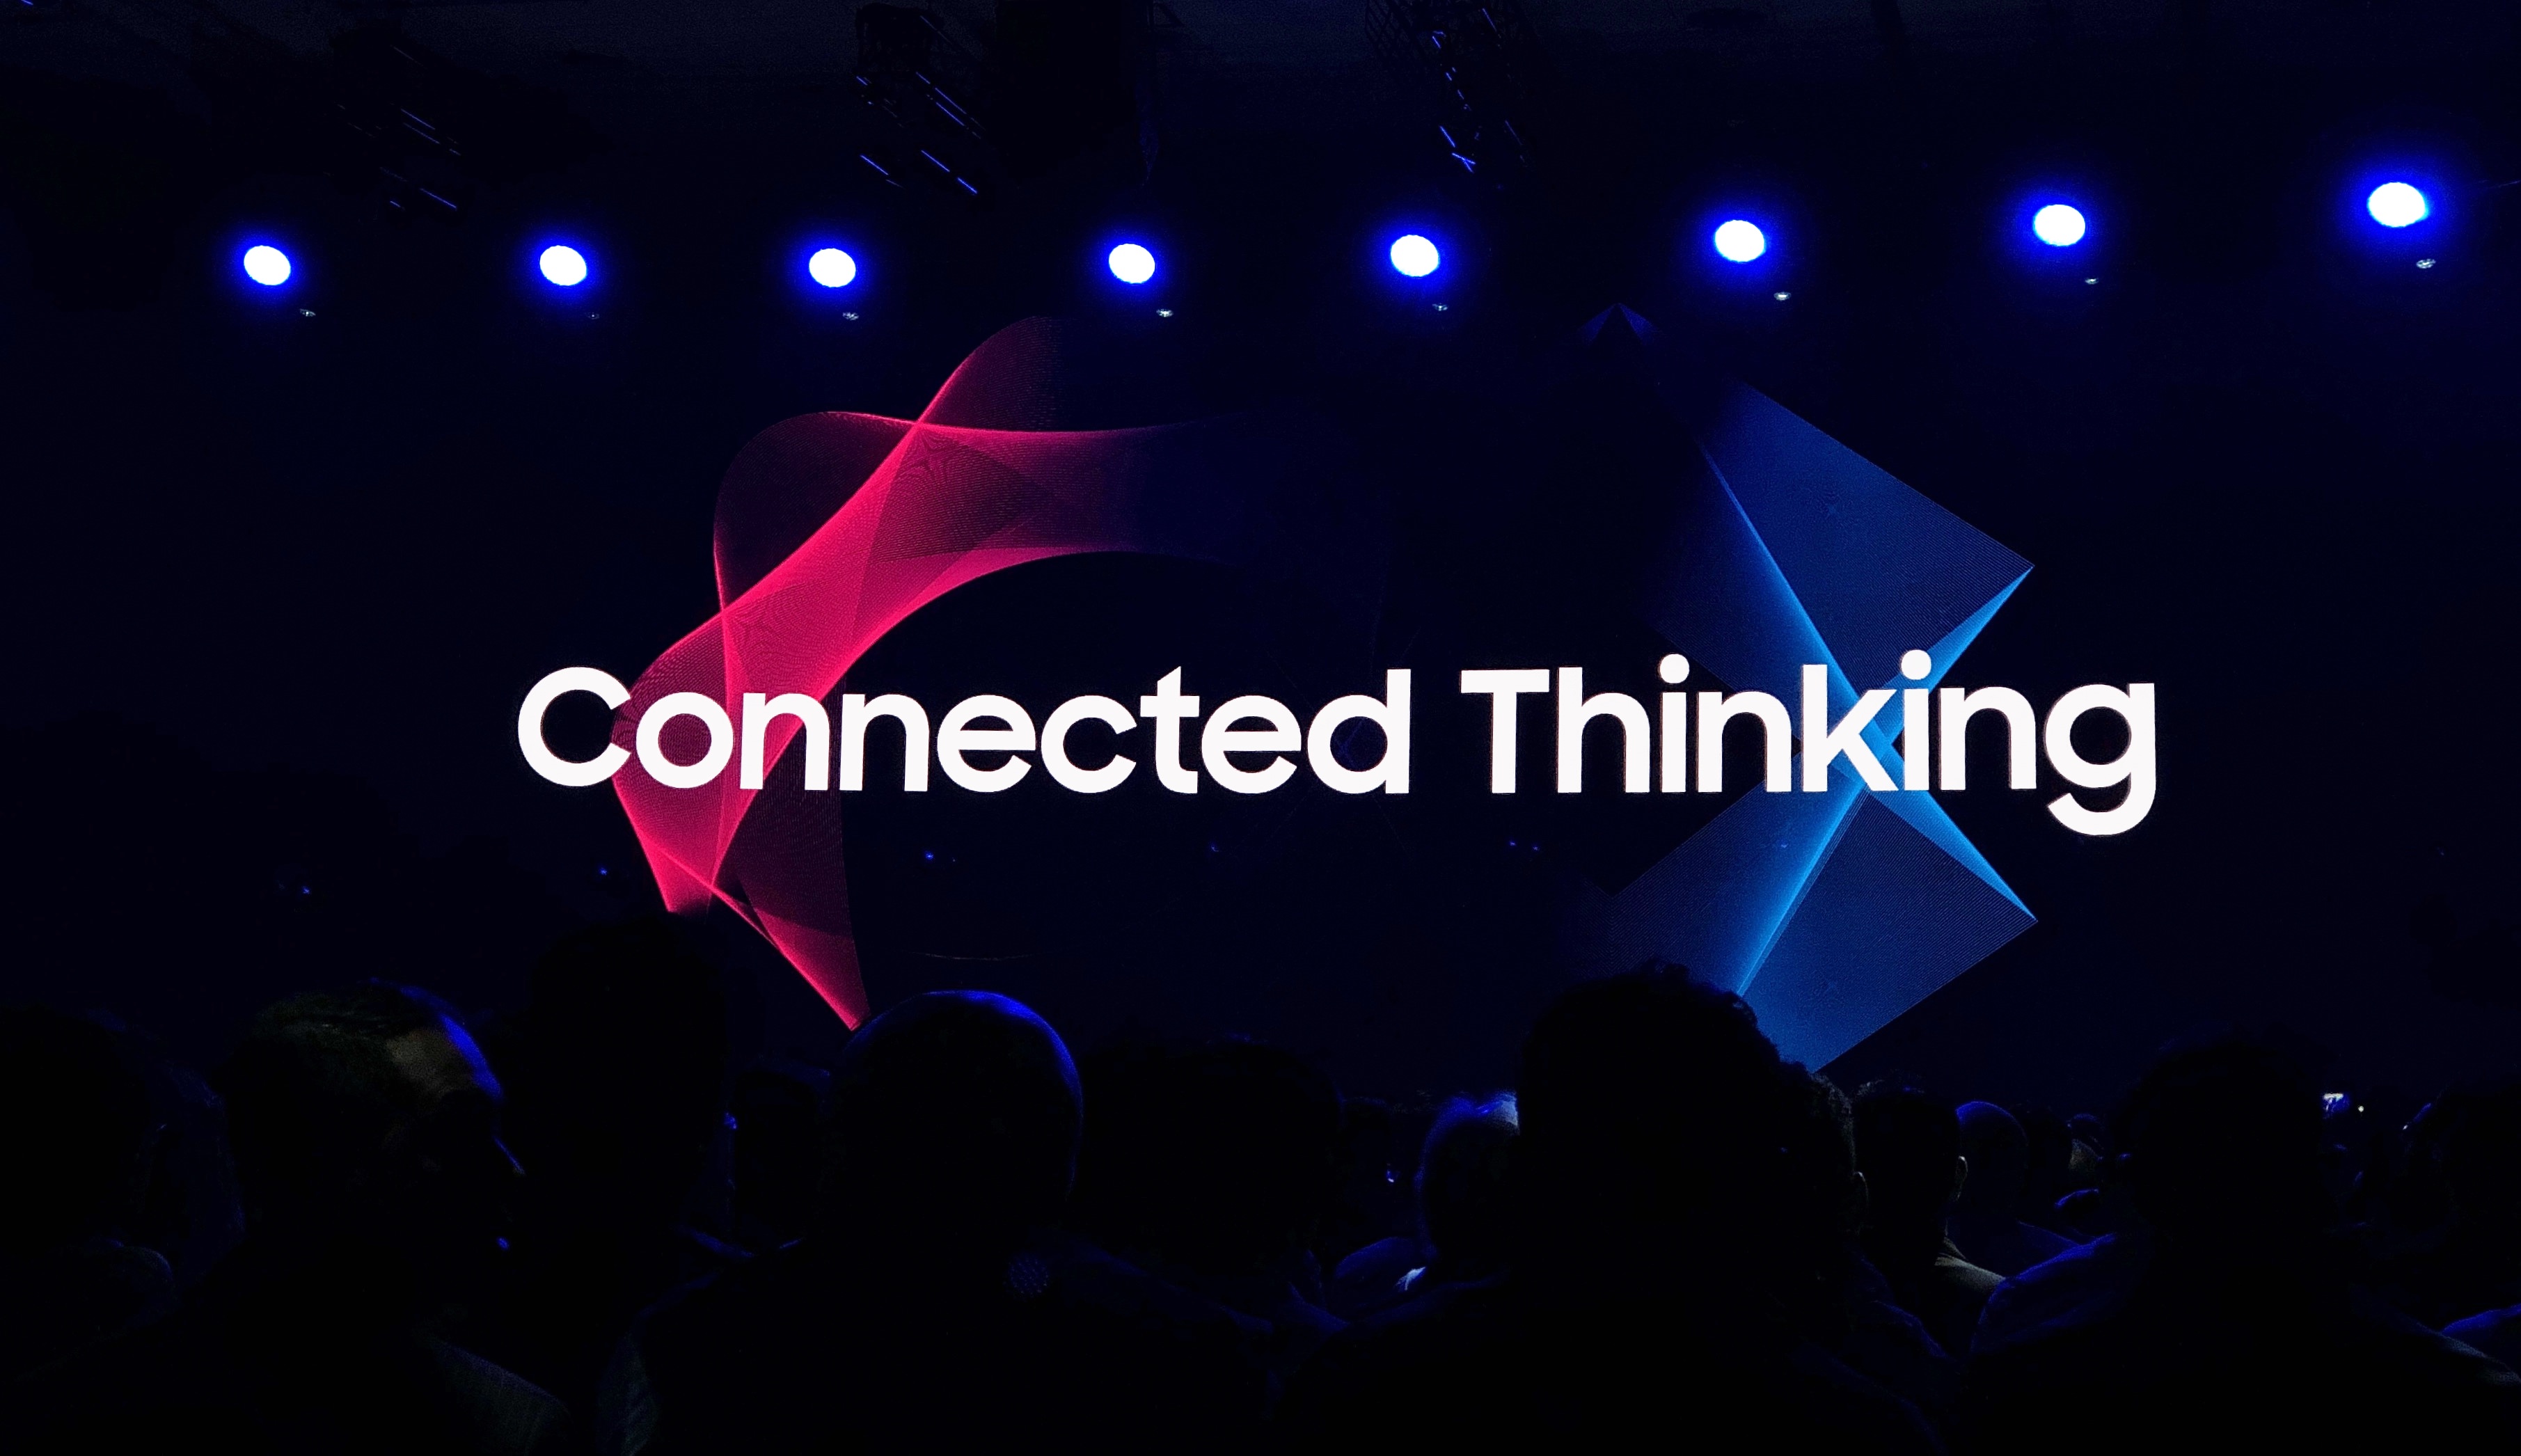 Samsung Aims for Connected Thinking at Developer Conference